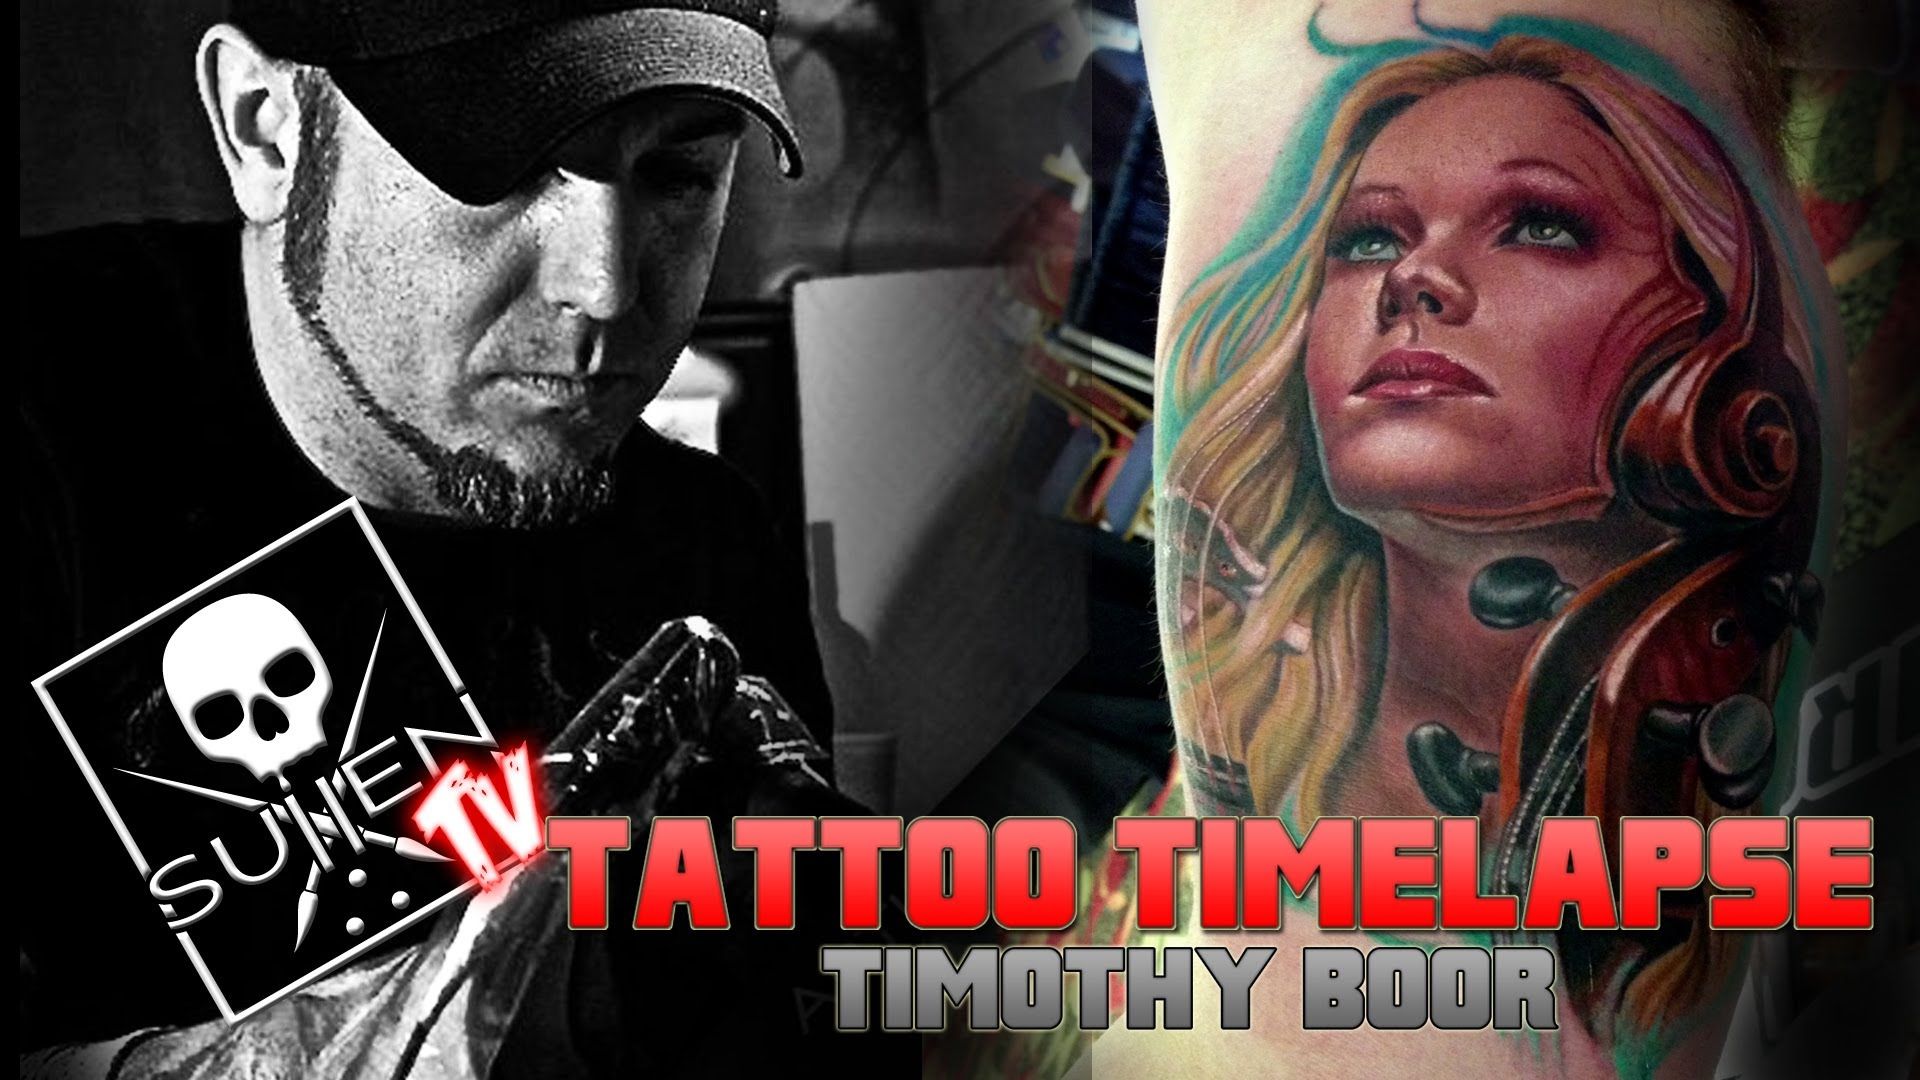 Tattoo Time Lapse - Timothy Boor - Tattoos Color Woman Infused